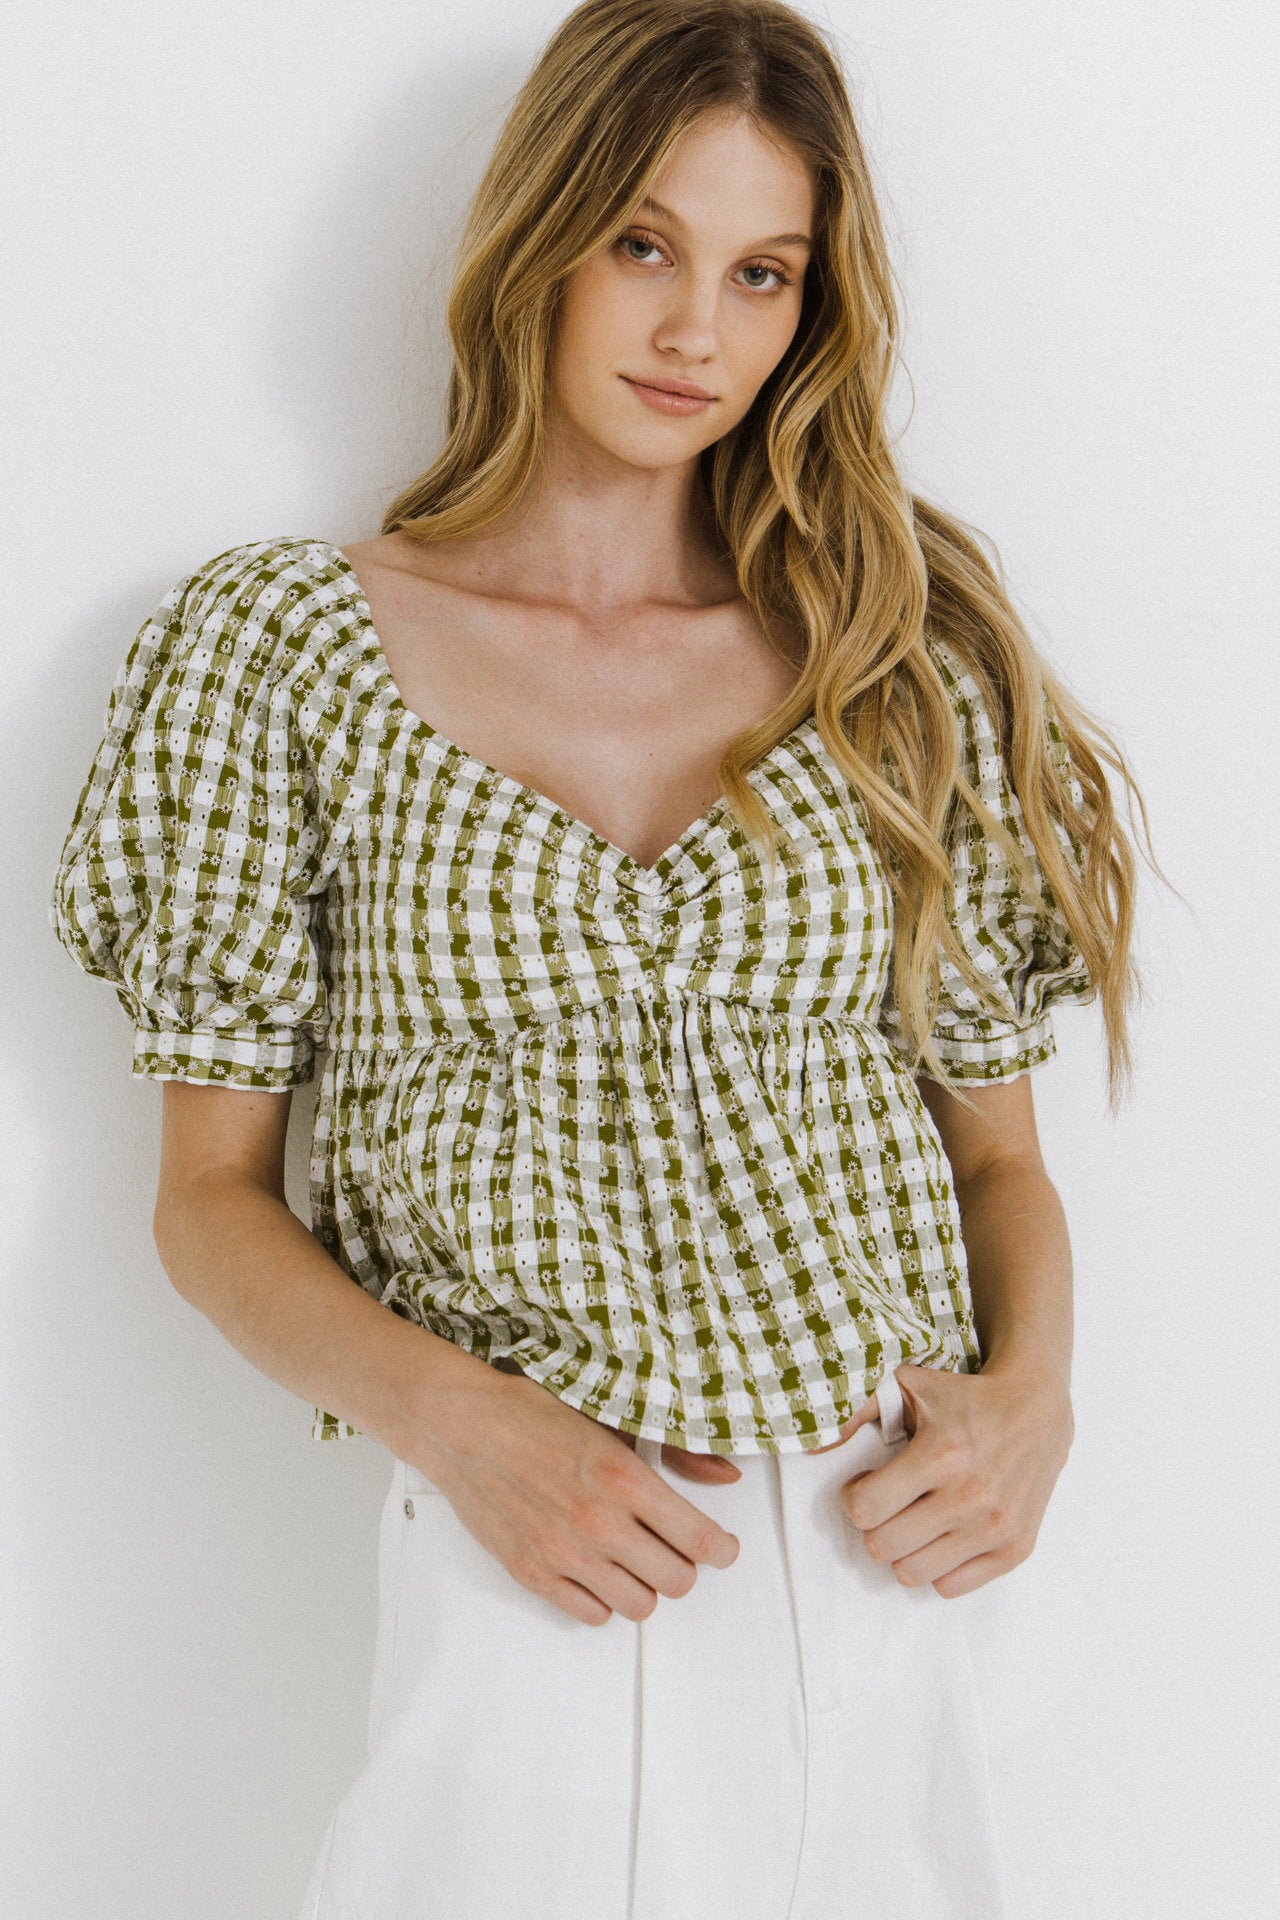 FREE THE ROSES - Gingham Check Top with Emboridery - TOPS available at Objectrare